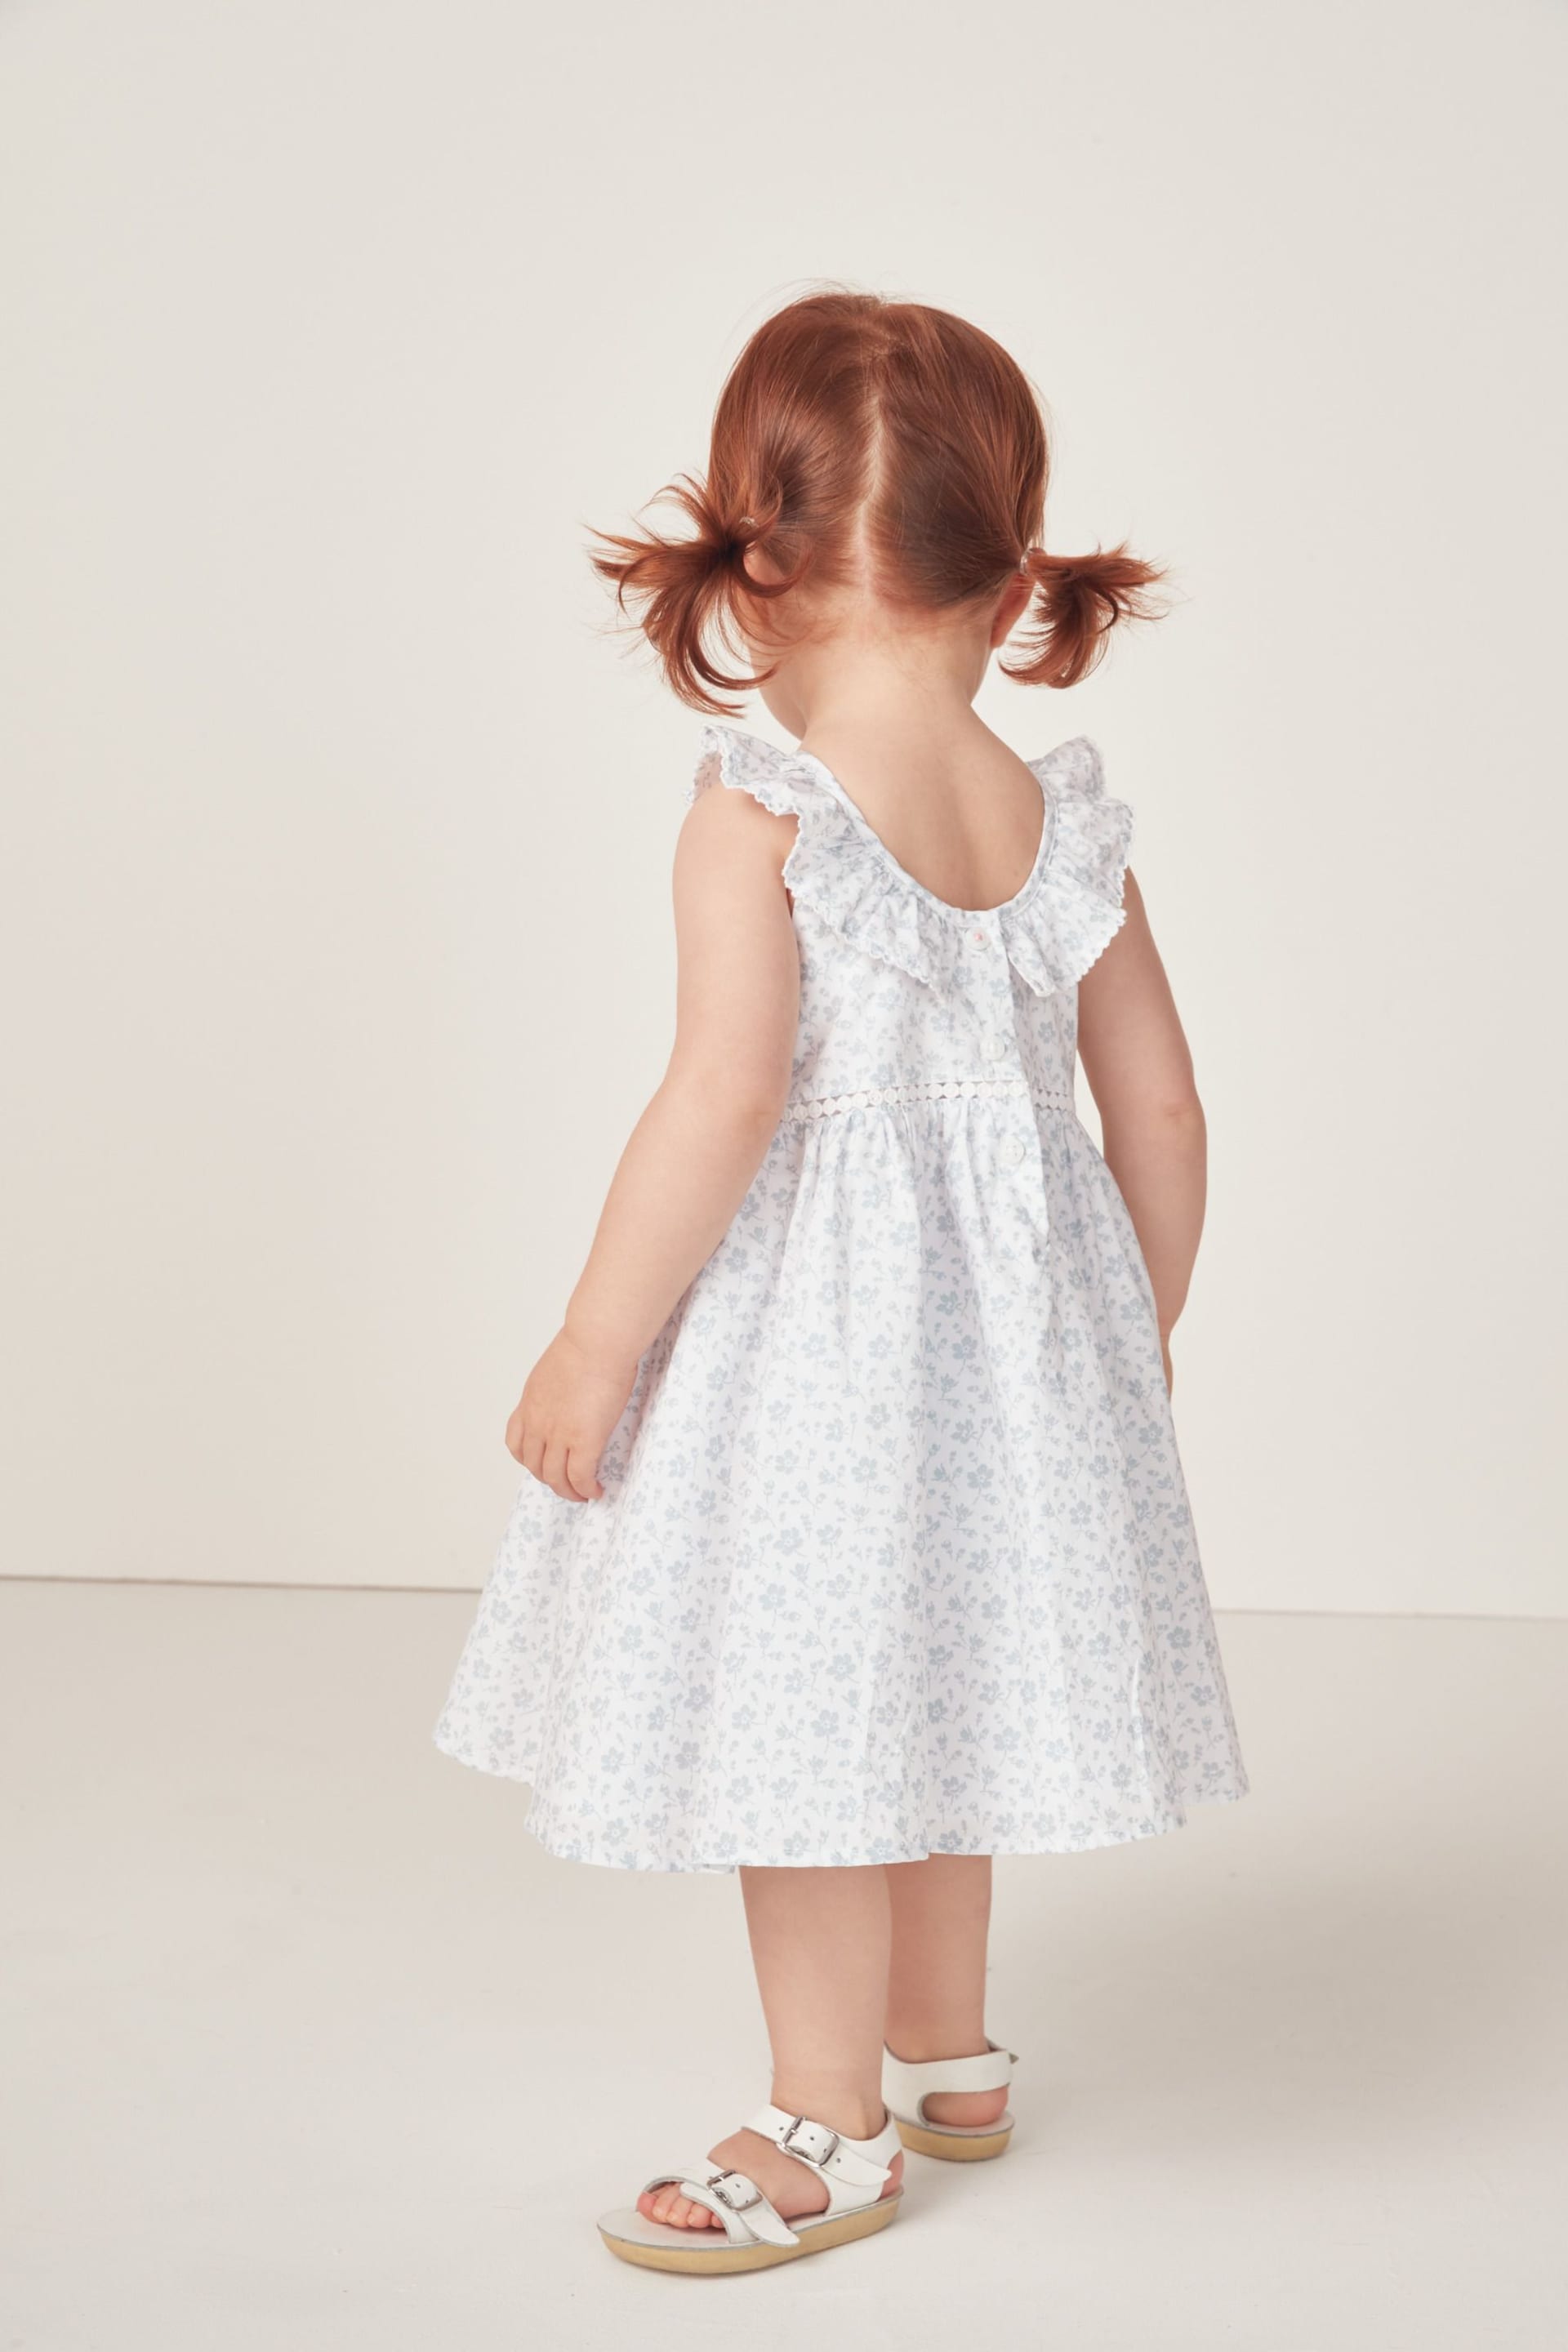 The White Company Blue Margot Floral Cotton Swing Dress - Image 6 of 12